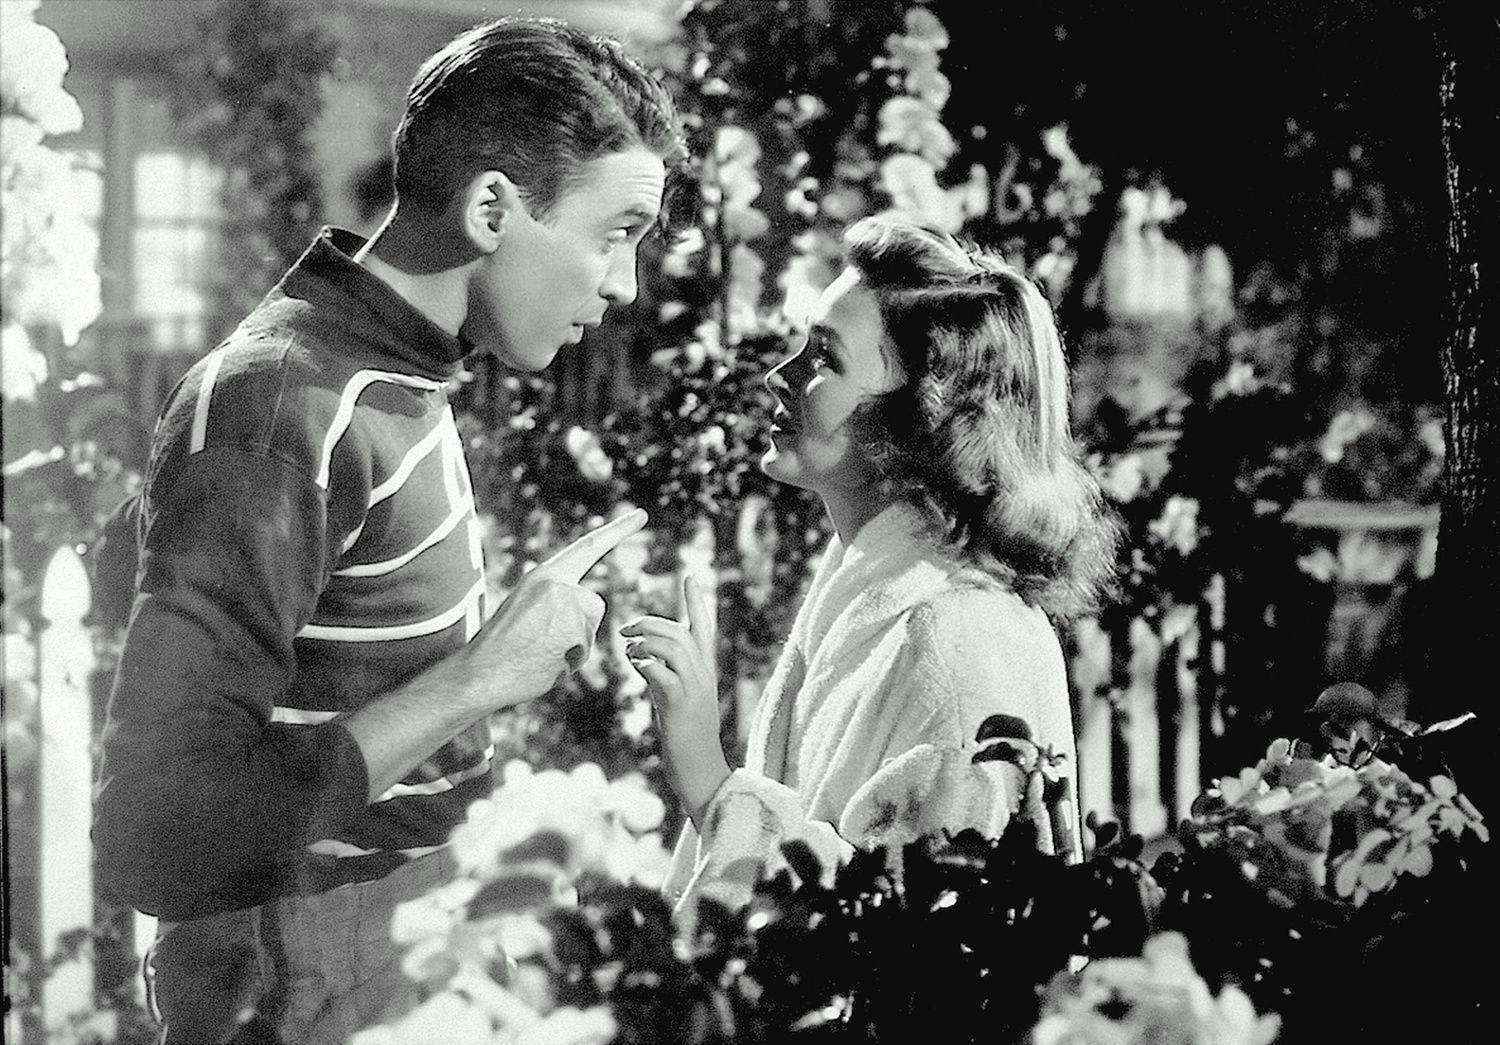 An Endearing Scene From The Movie “it’s A Wonderful Life”